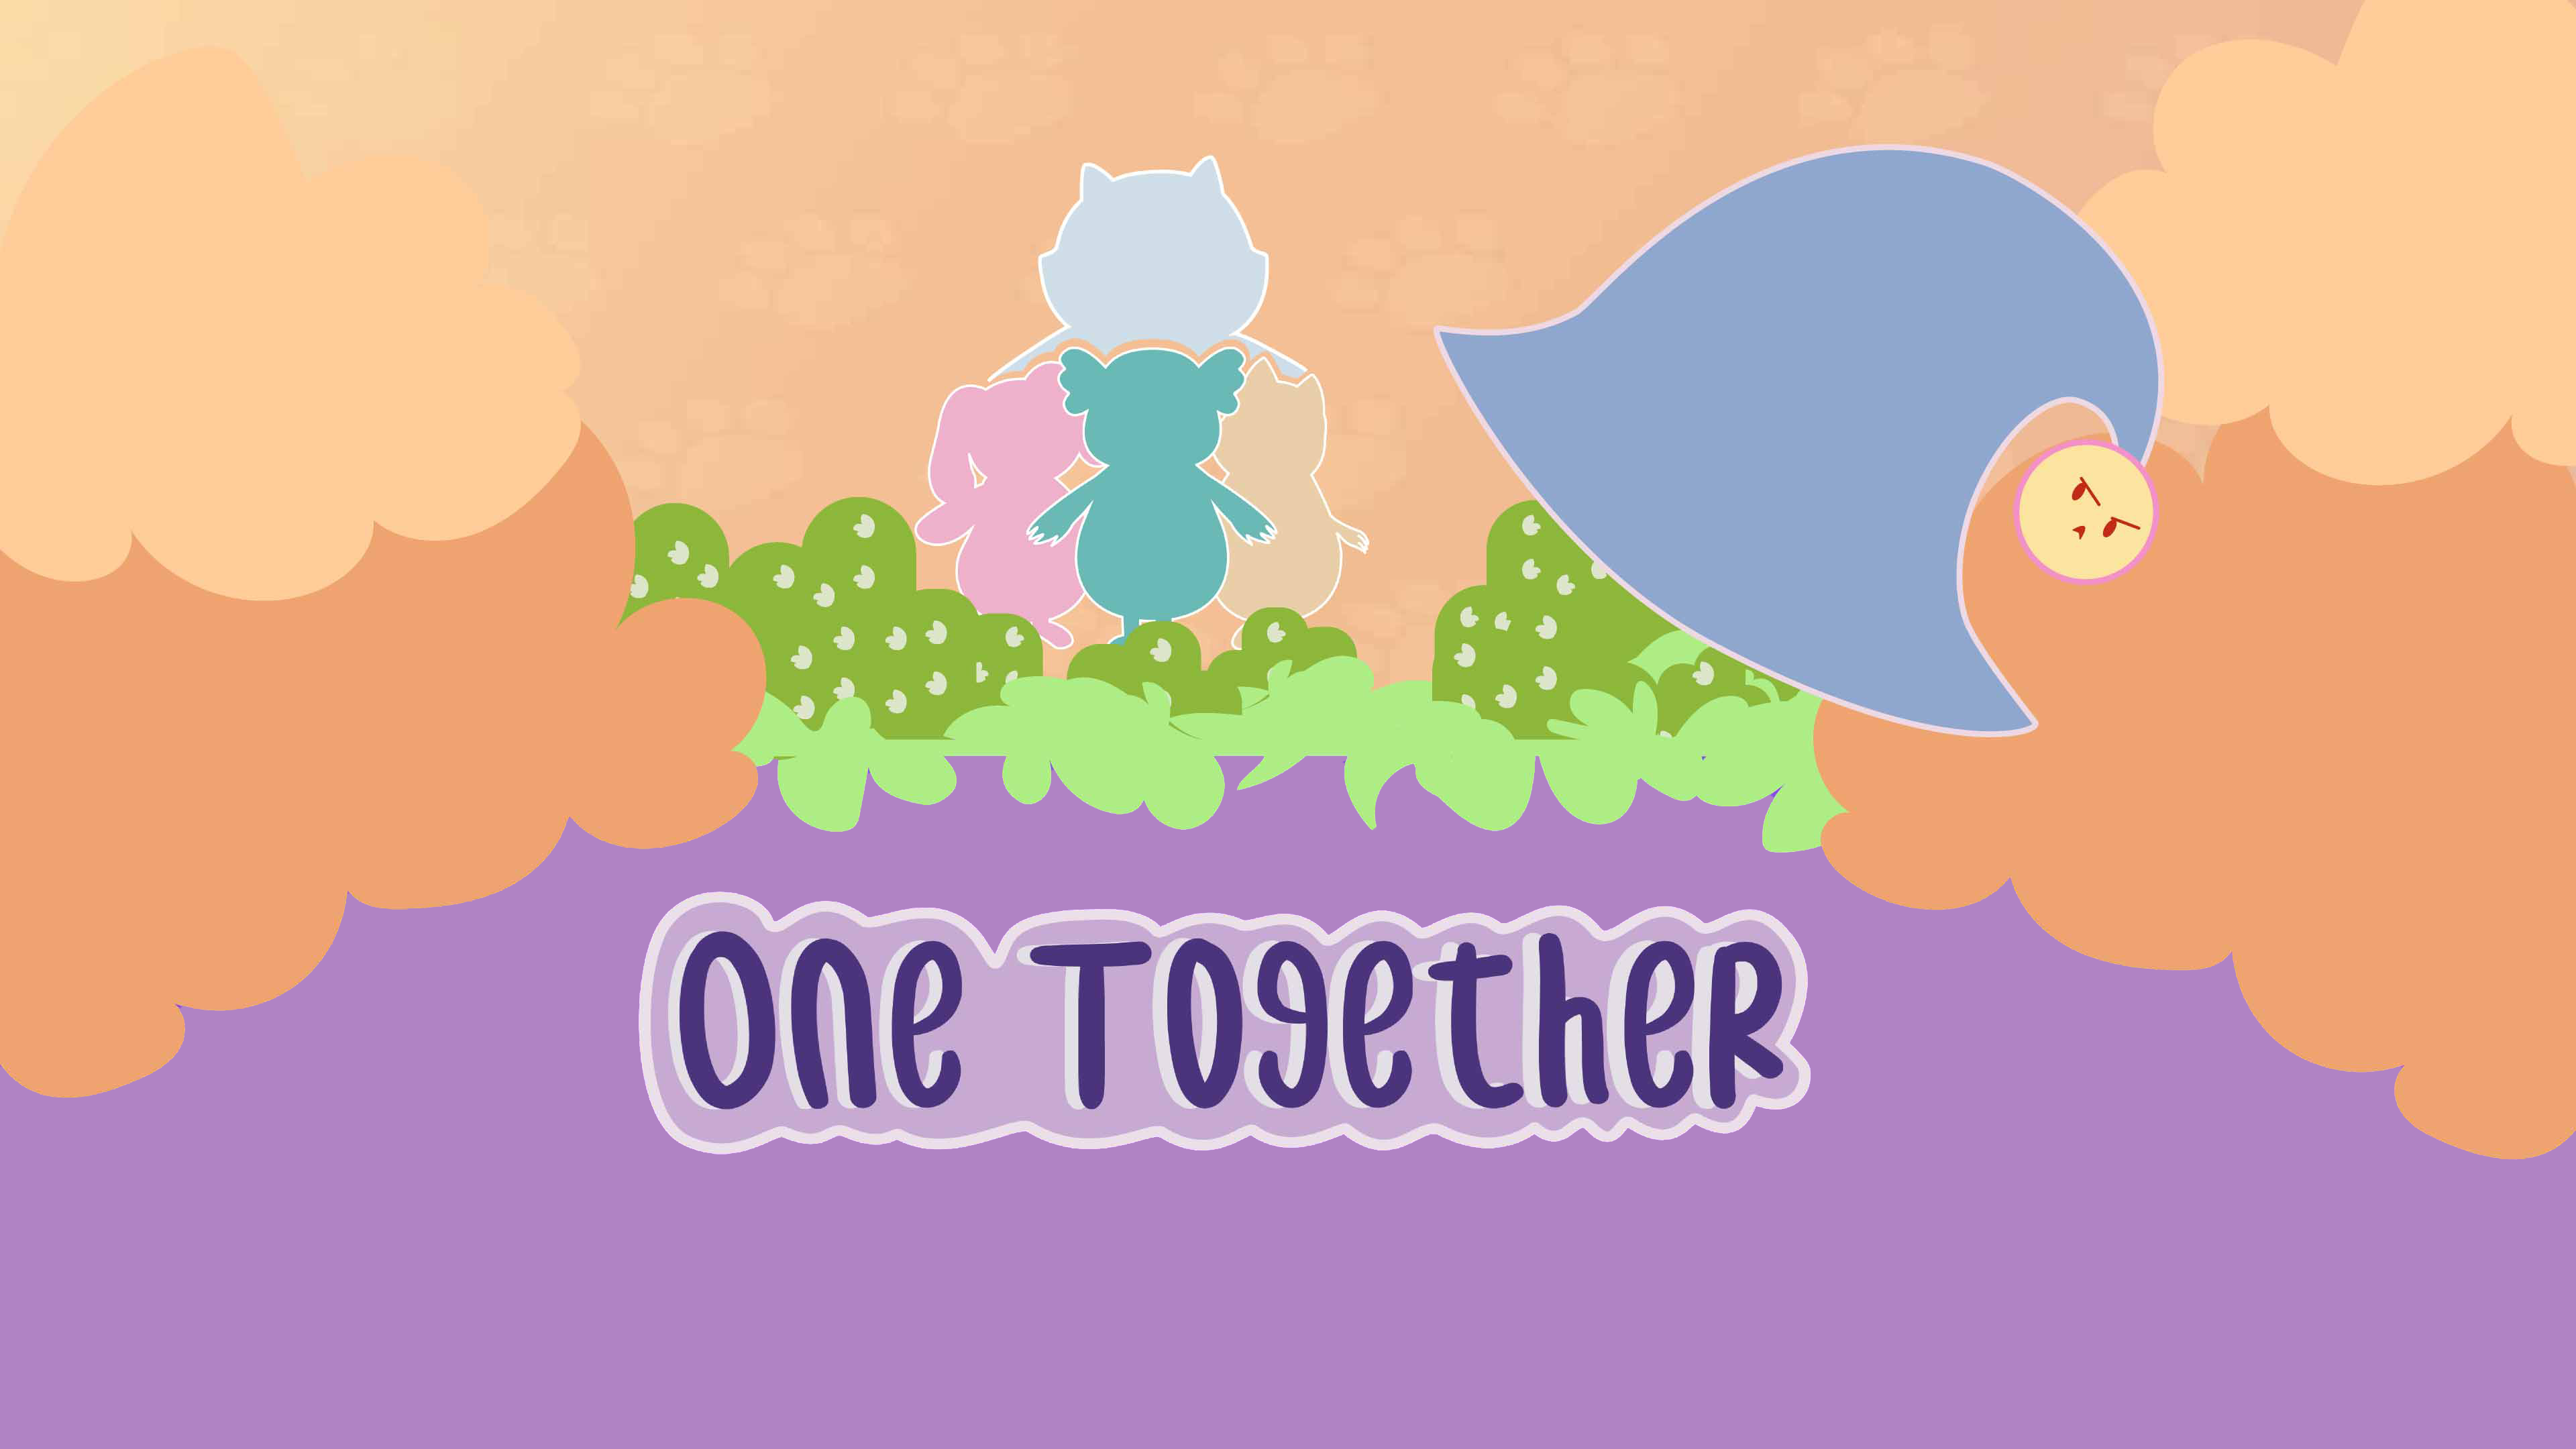 One Together